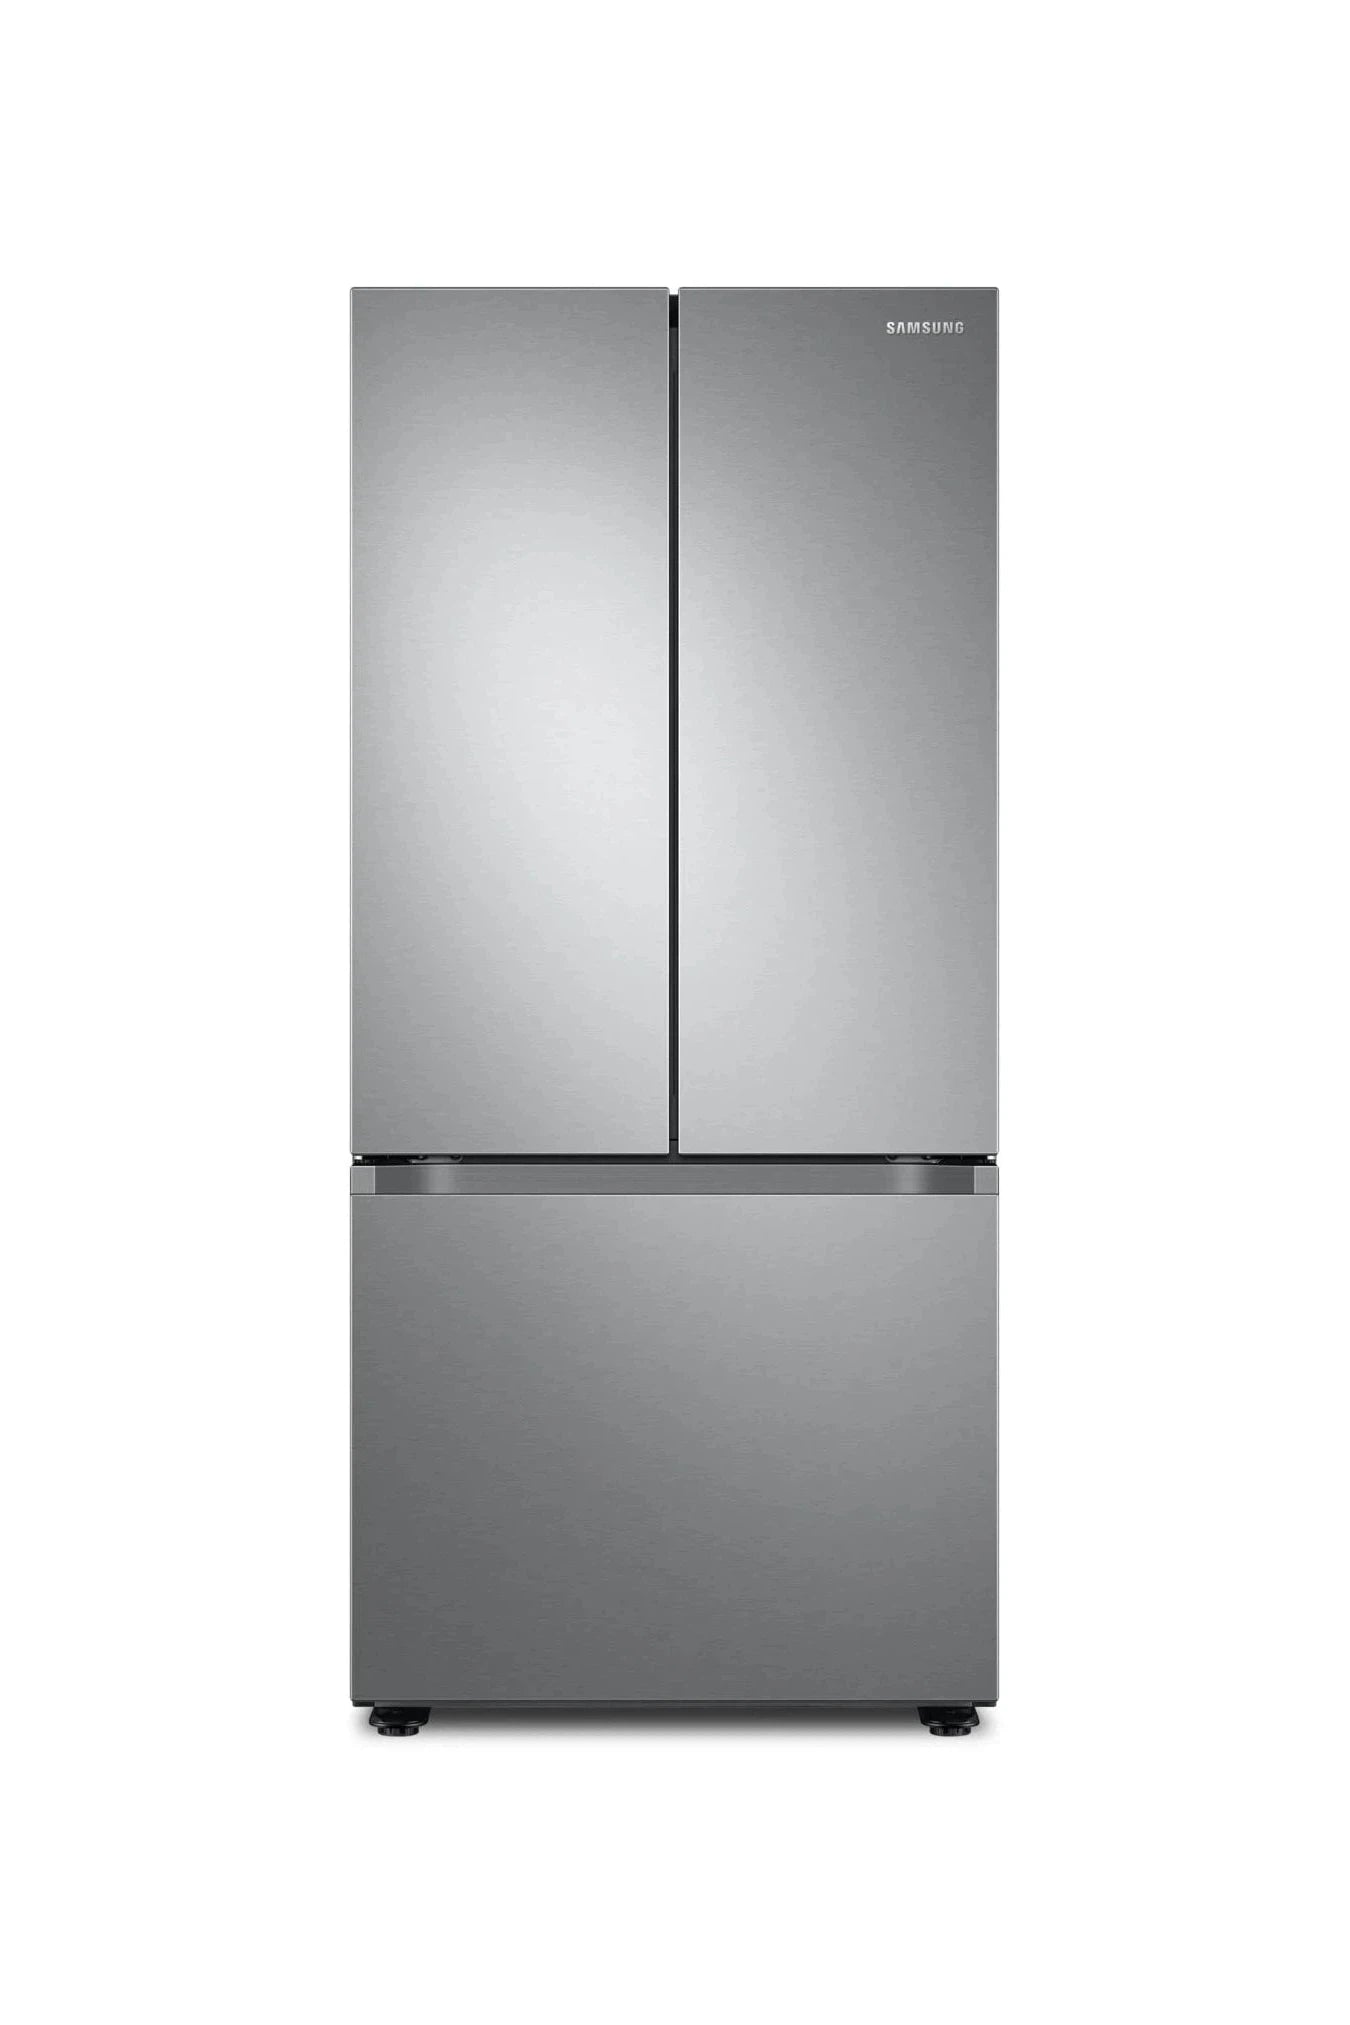 Samsung RF22A4111SR_30-Inch W 21.8 Cu.Ft. French Door Refrigerator with Icemaker in Freezer in Stainless Steel_AB1278